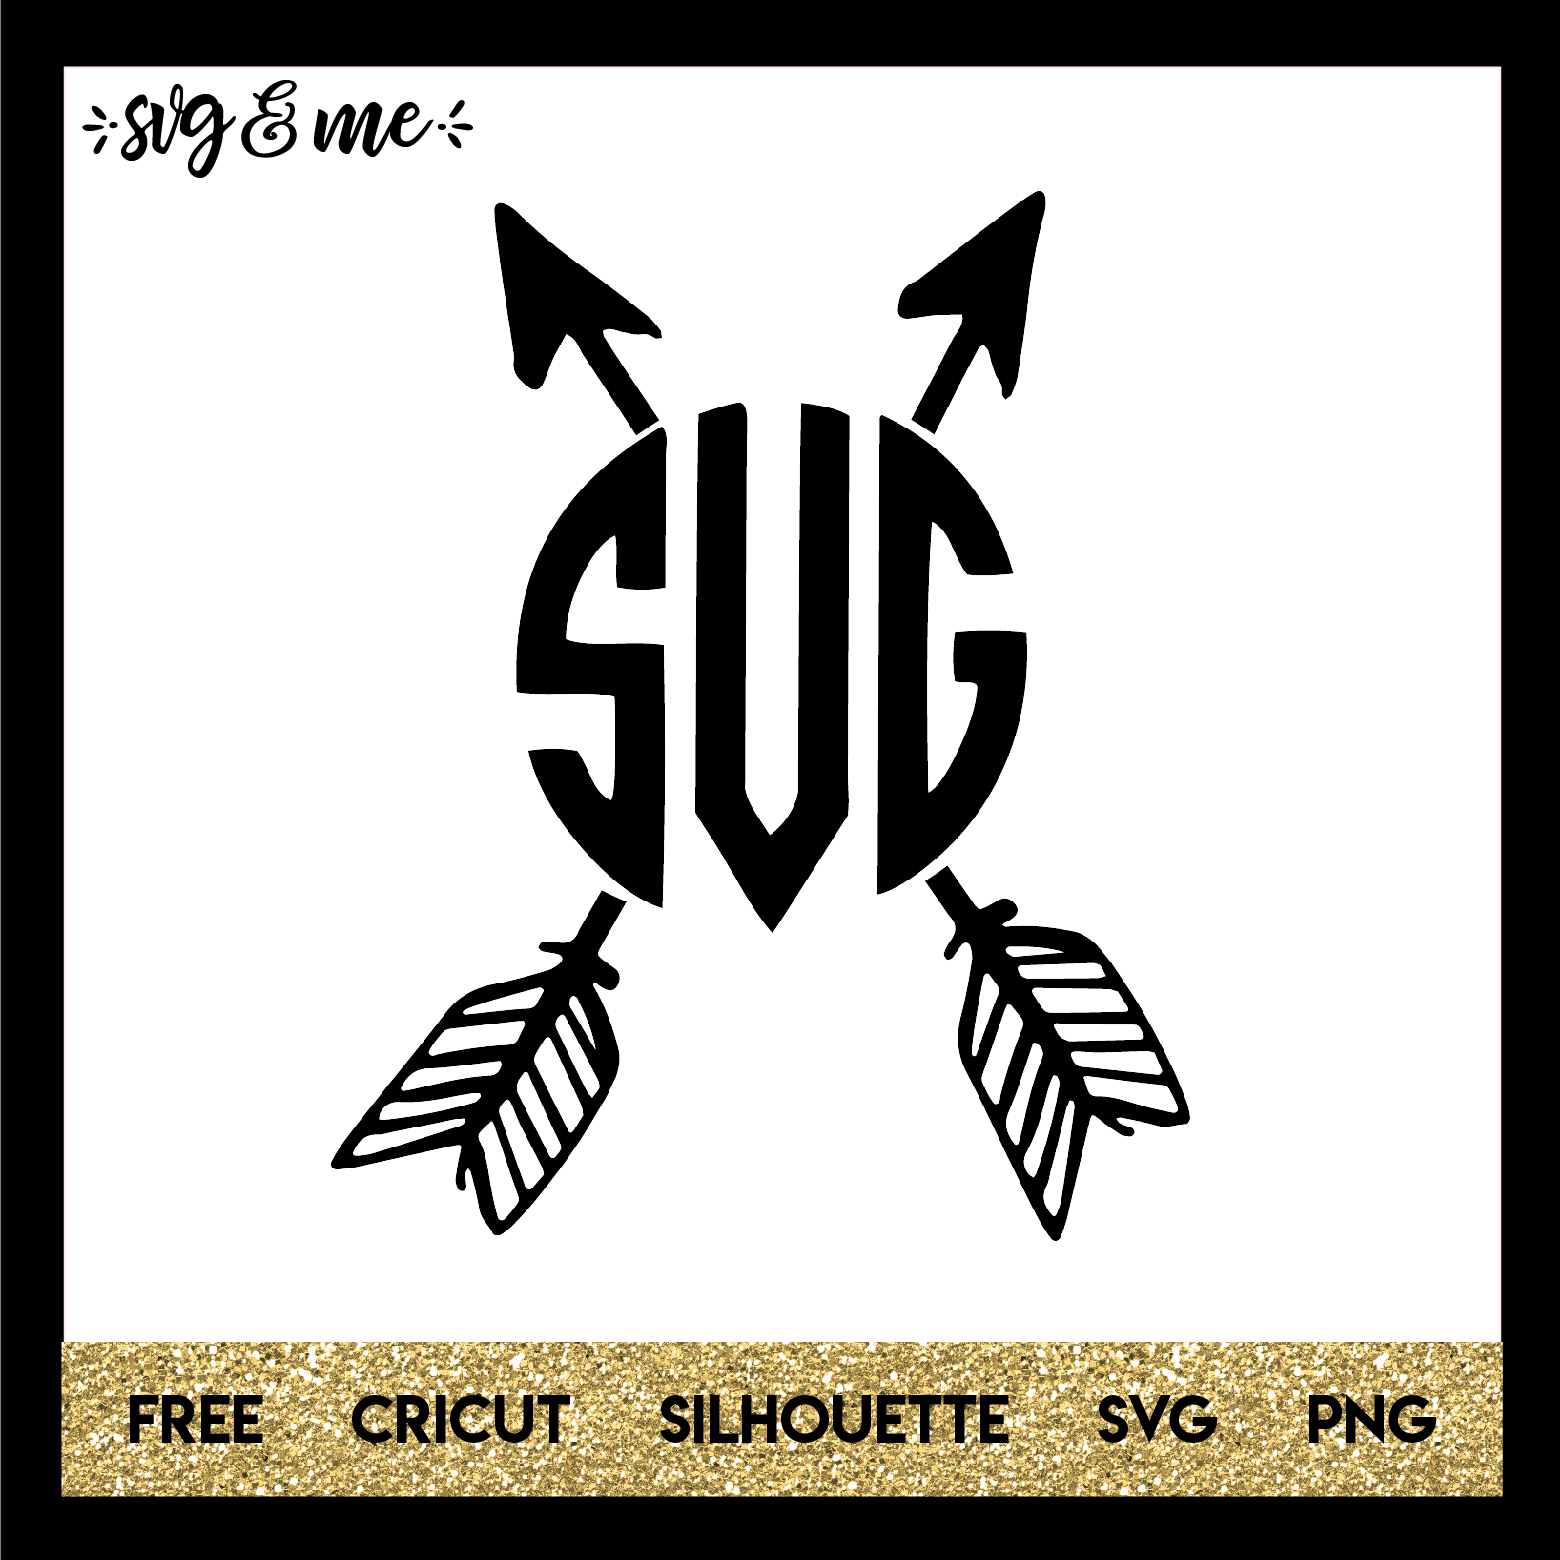 FREE SVG CUT FILE for Cricut, Silhouette and more - Boho Crossed Arrows Monogram SVG